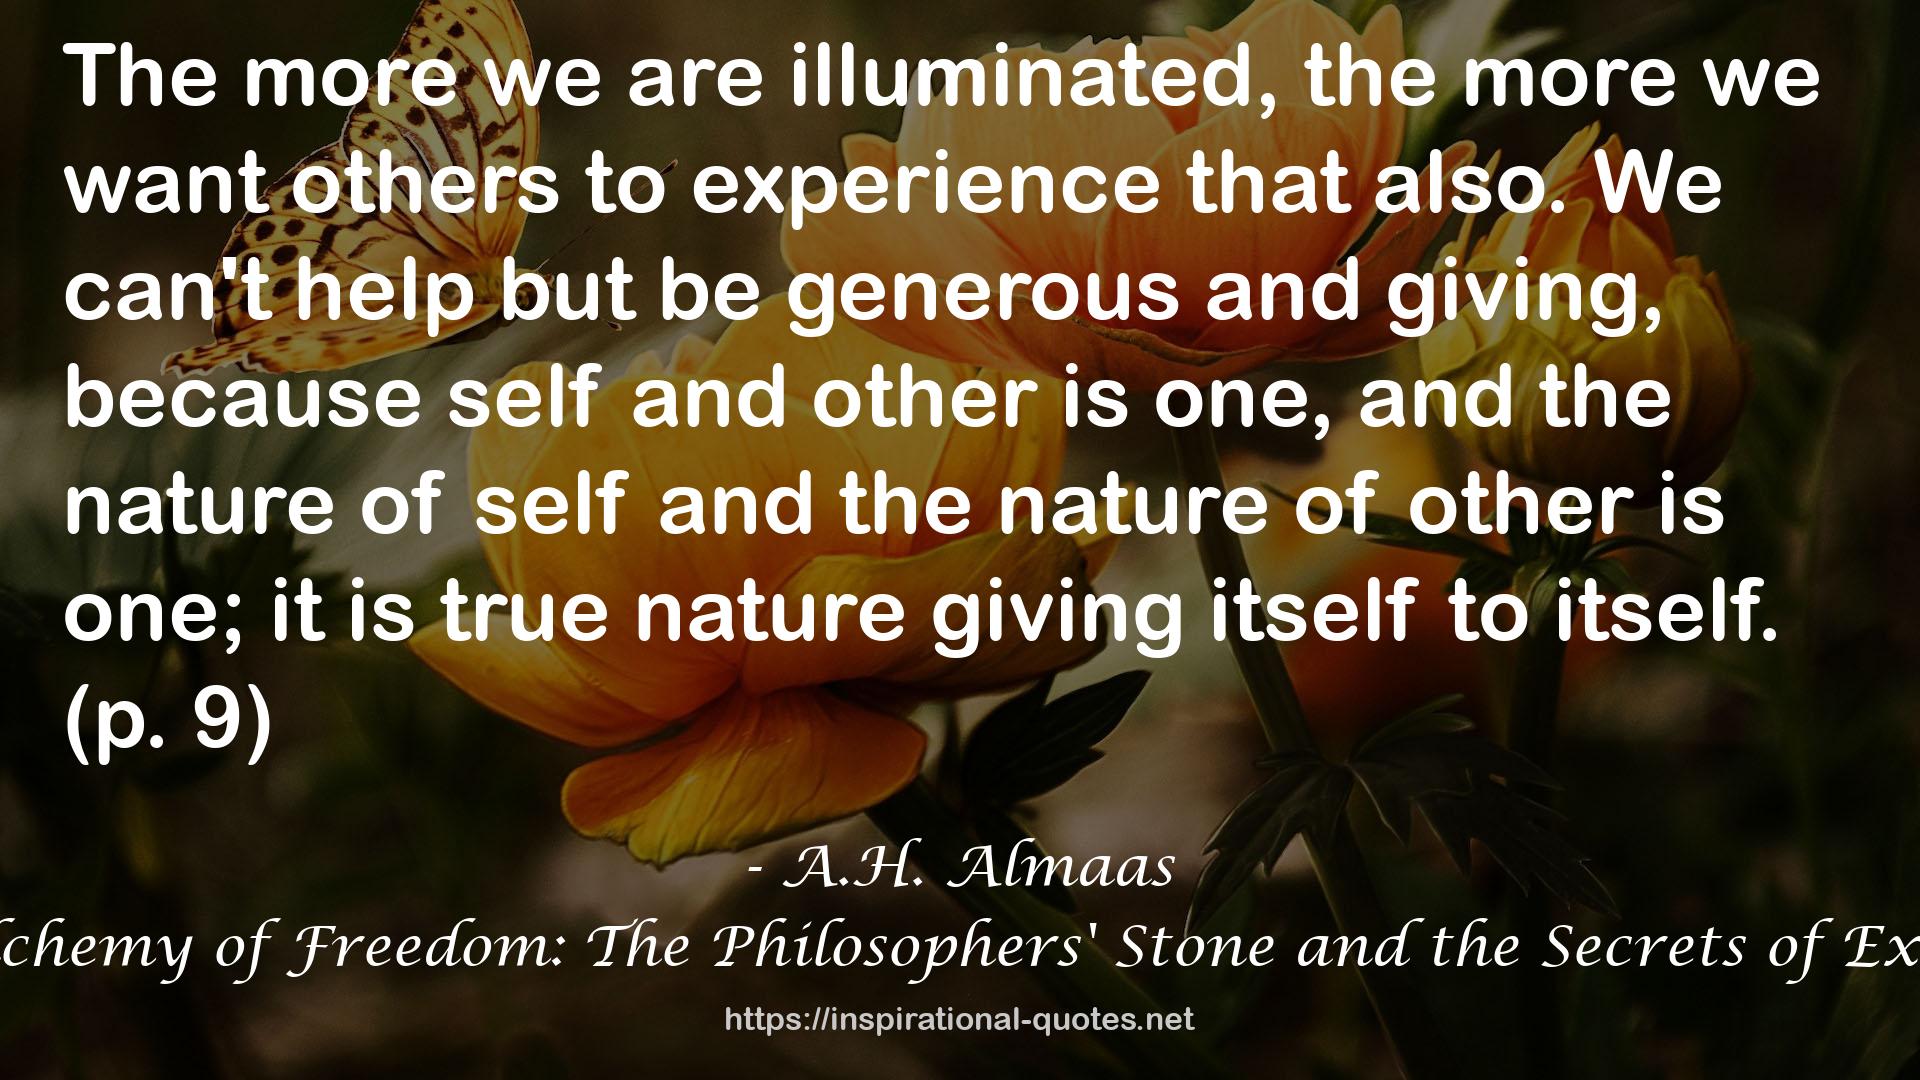 The Alchemy of Freedom: The Philosophers' Stone and the Secrets of Existence QUOTES